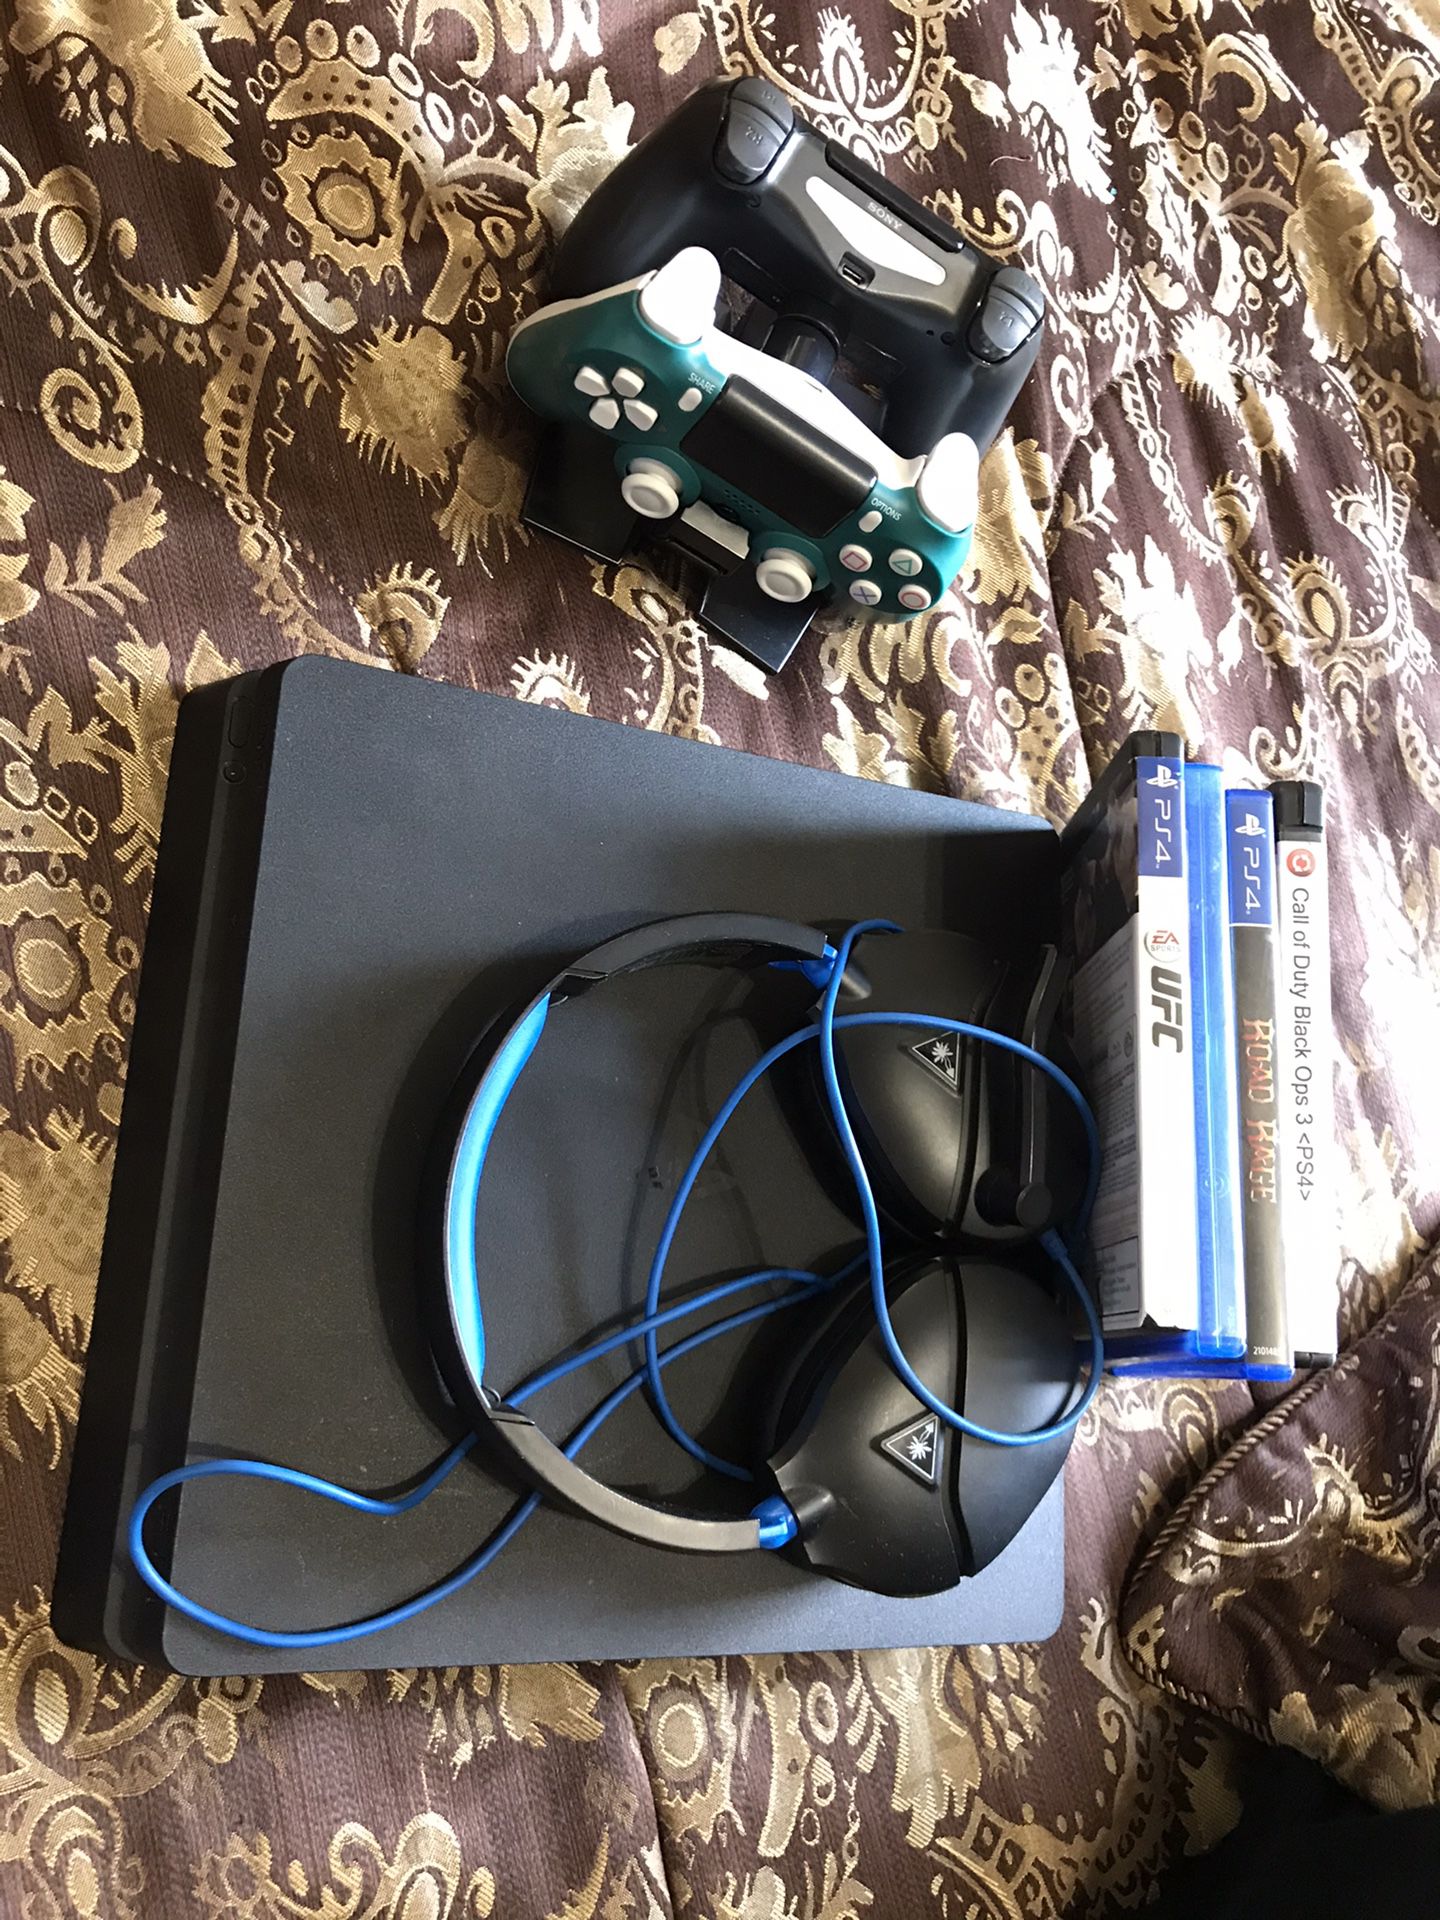 PS4 W/3 controllers 4 games and docking station and headphones